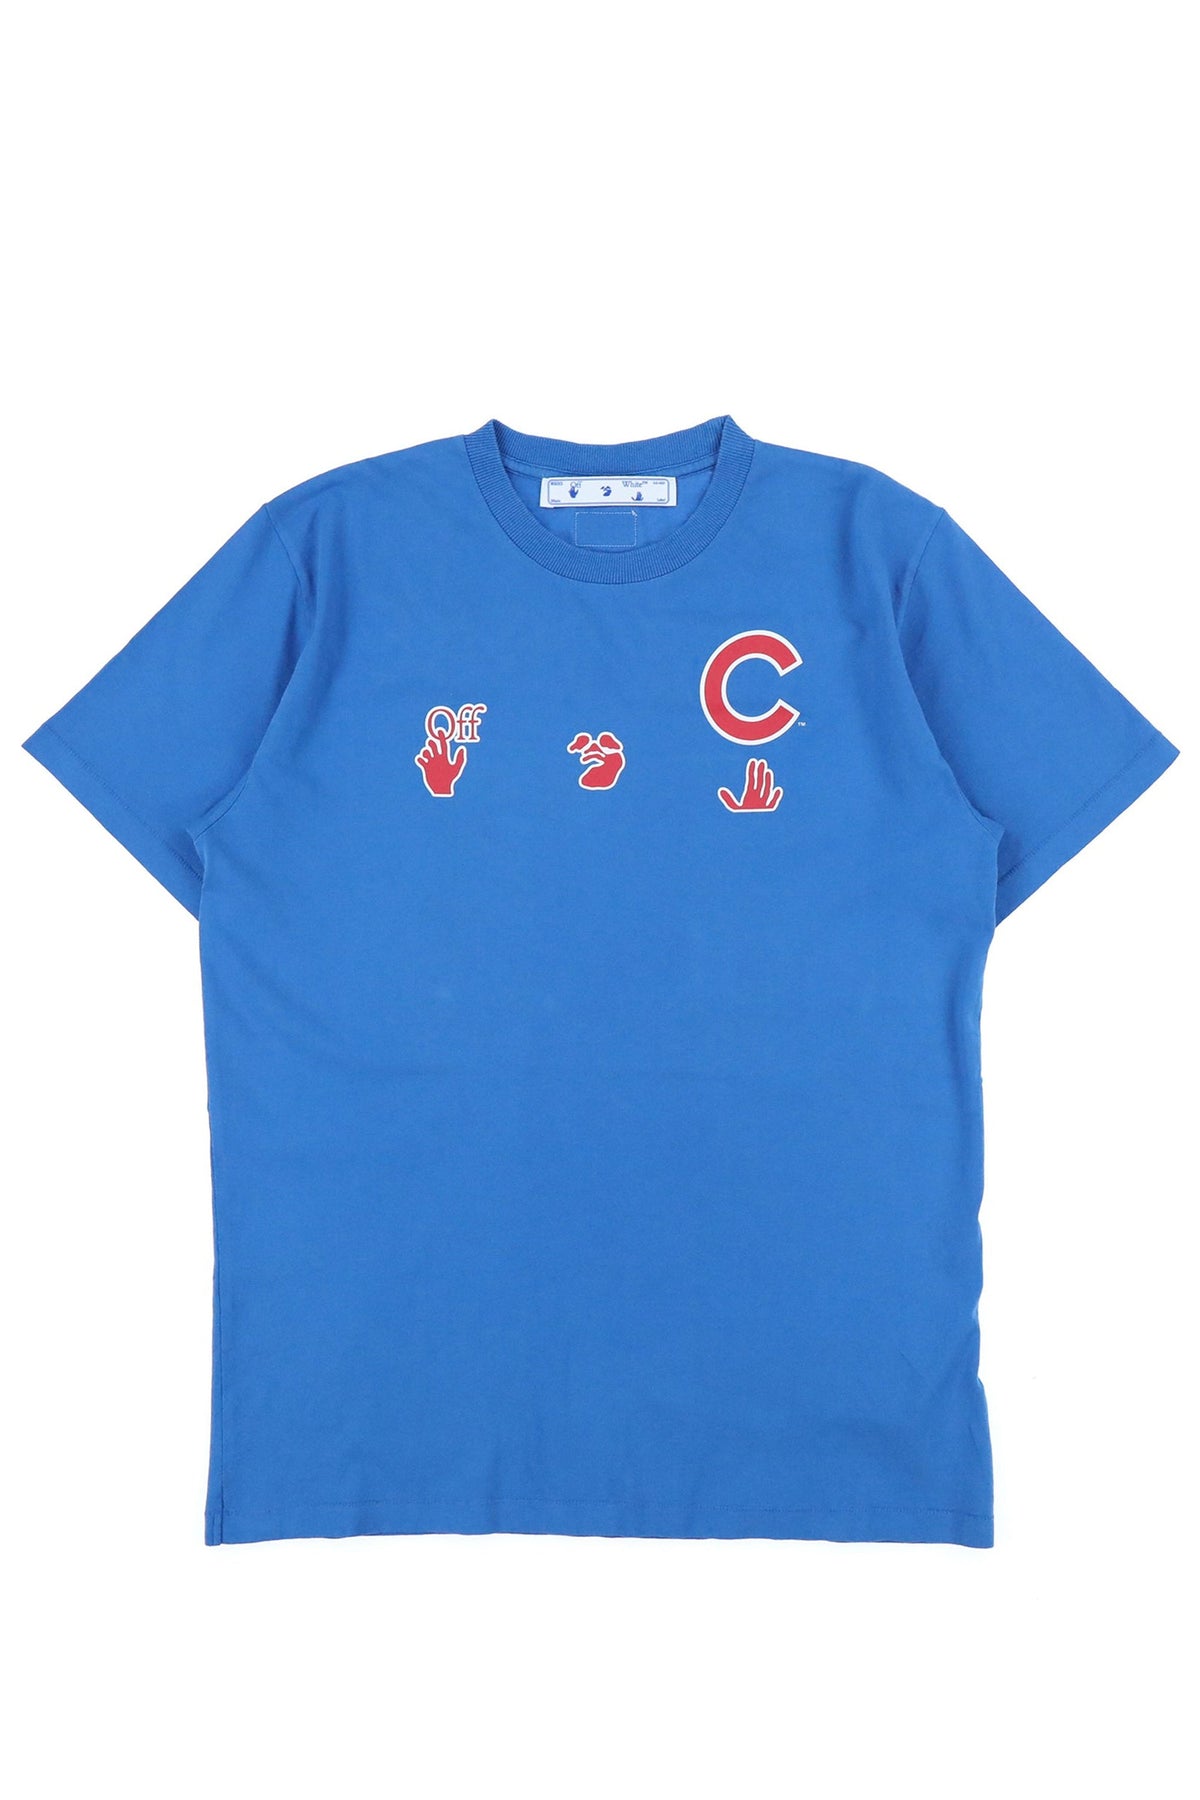 MLB_CHICAGO CUBS S/S TEE / BLU RED WHT